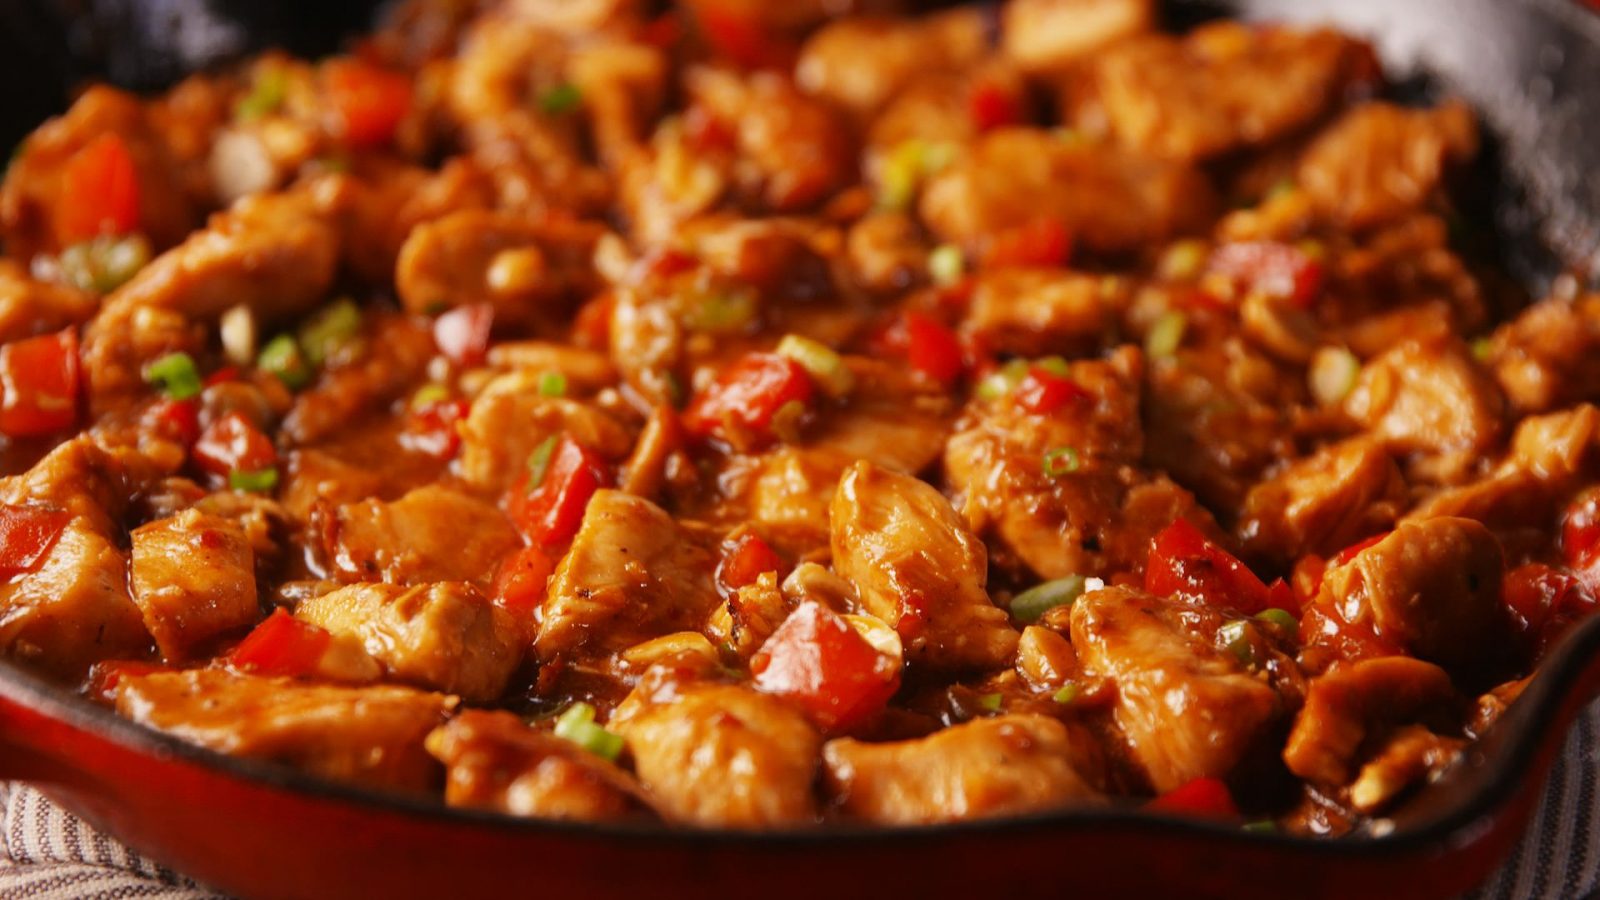 🌶 Only a Person Who Can Handle the Heat Will Have Eaten 13/25 of These Spicy Foods Kung Pao Chicken